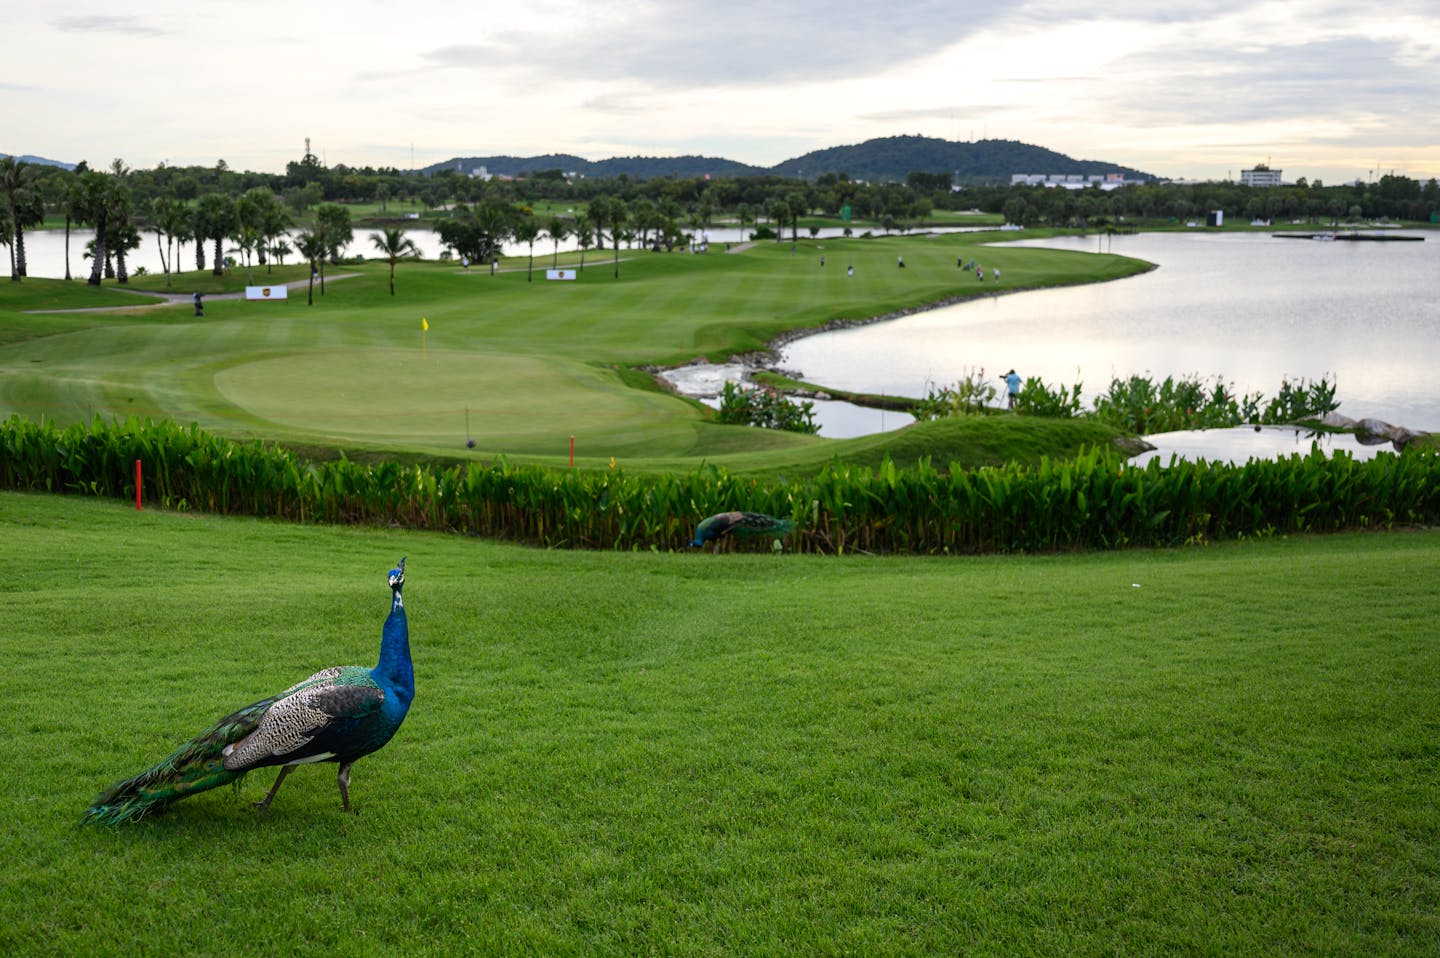 A peacock looks over the 18th hole